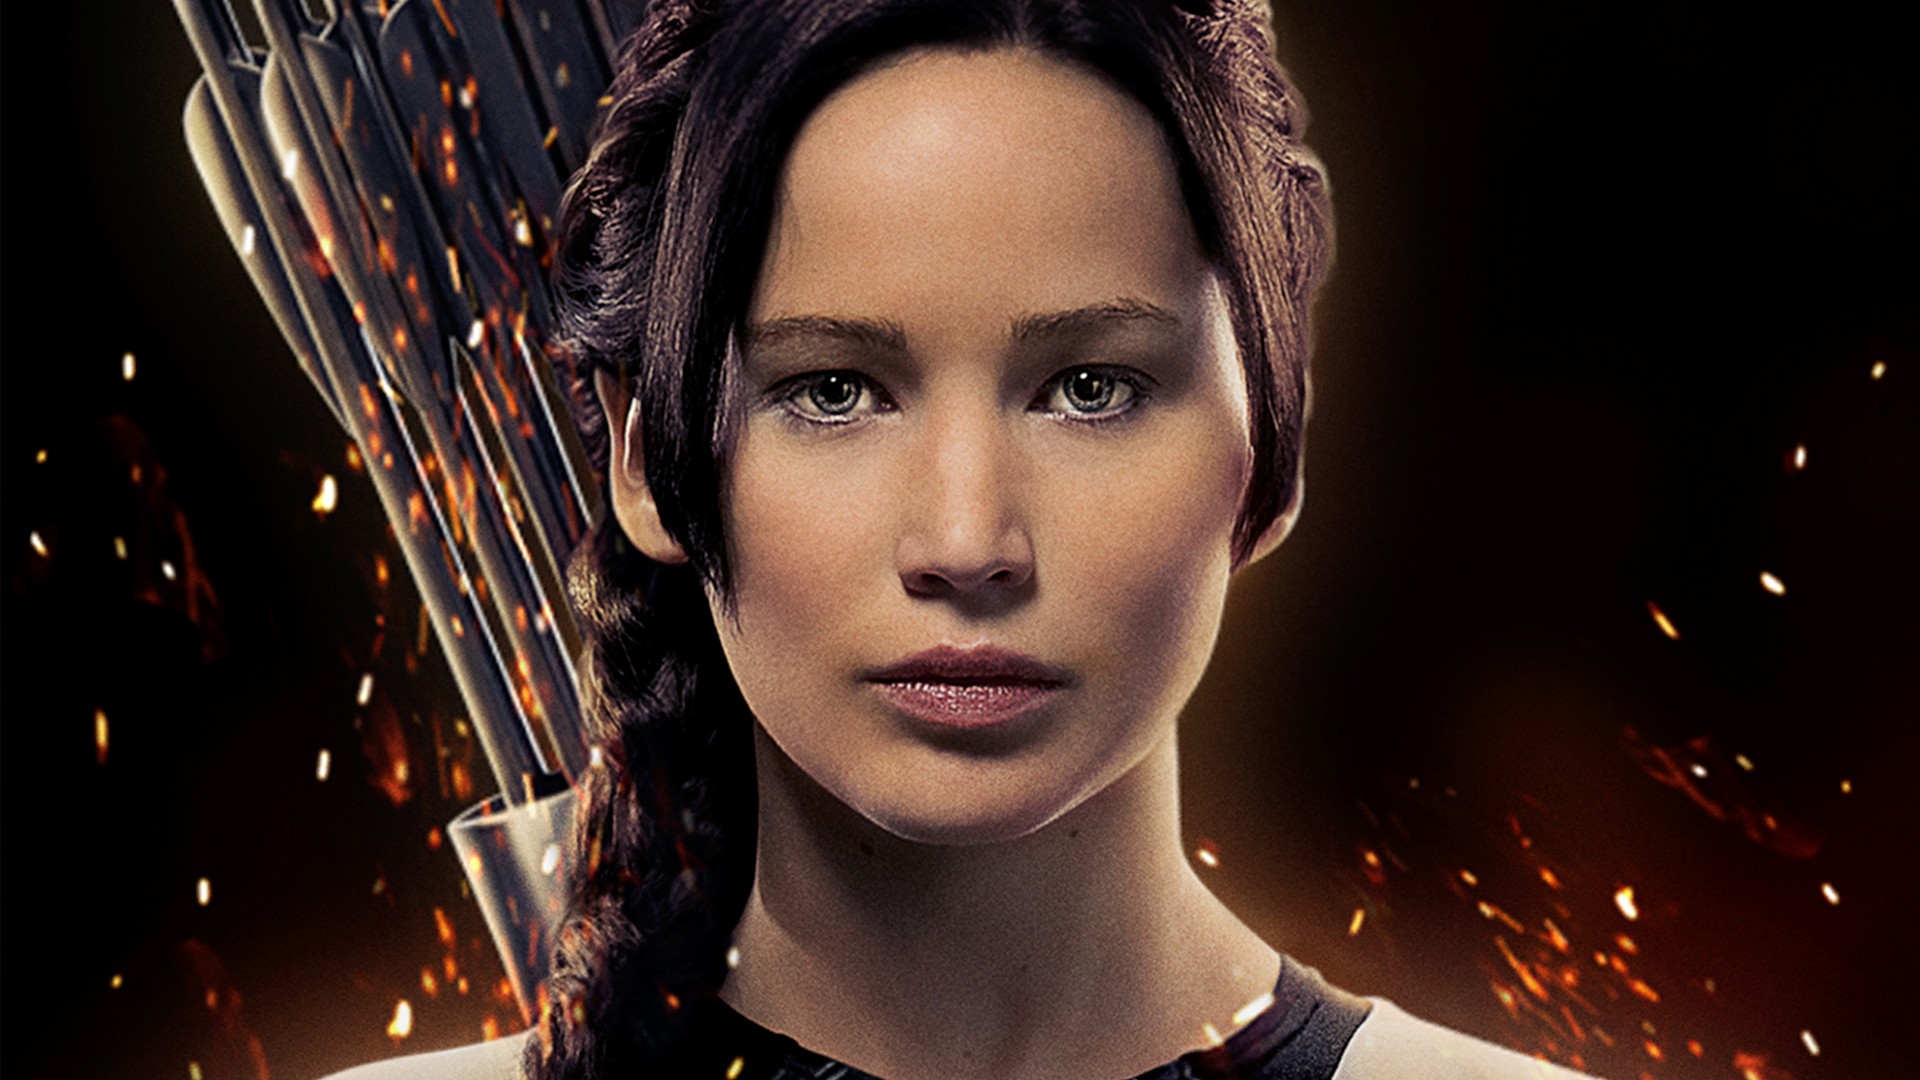 The Hunger Games: Catching Fire Pics, Movie Collection